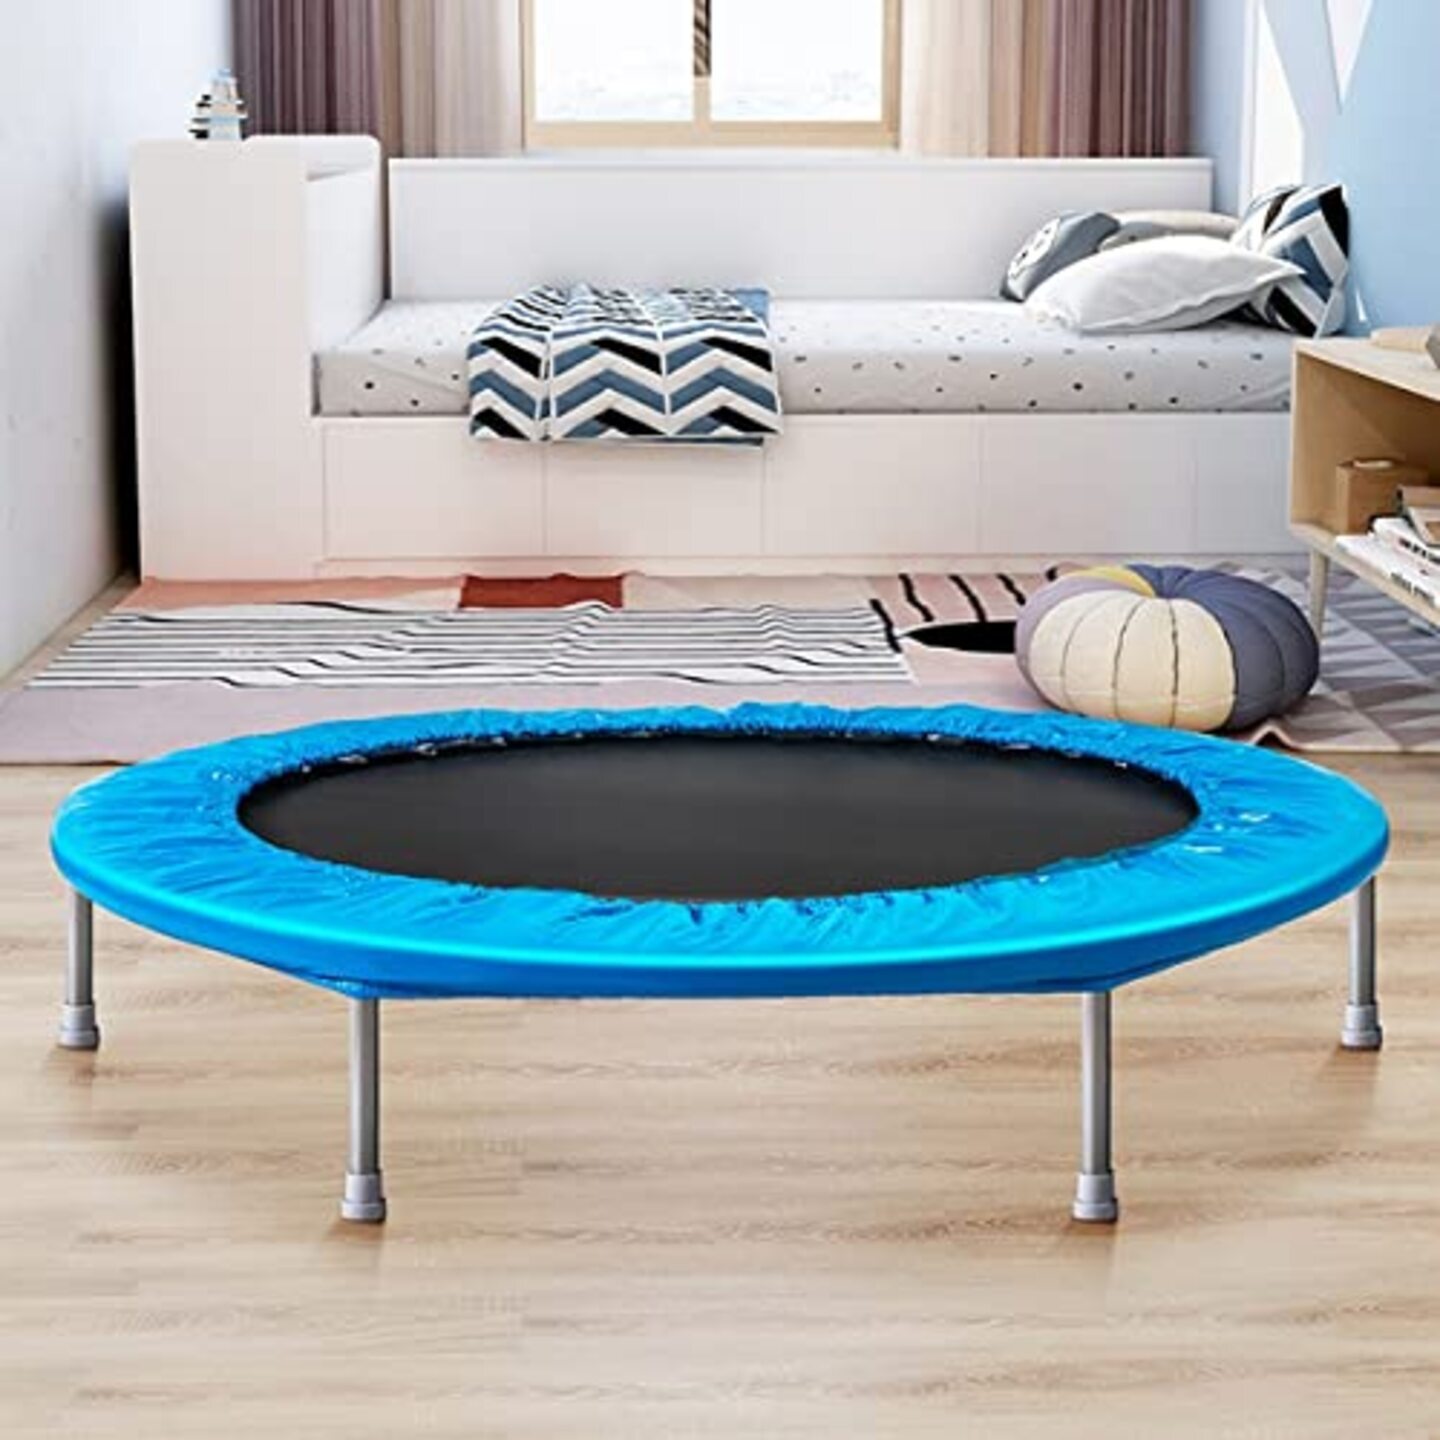 45 inch Rebounder Trampoline with Metal Springs and Padding for kids and adults